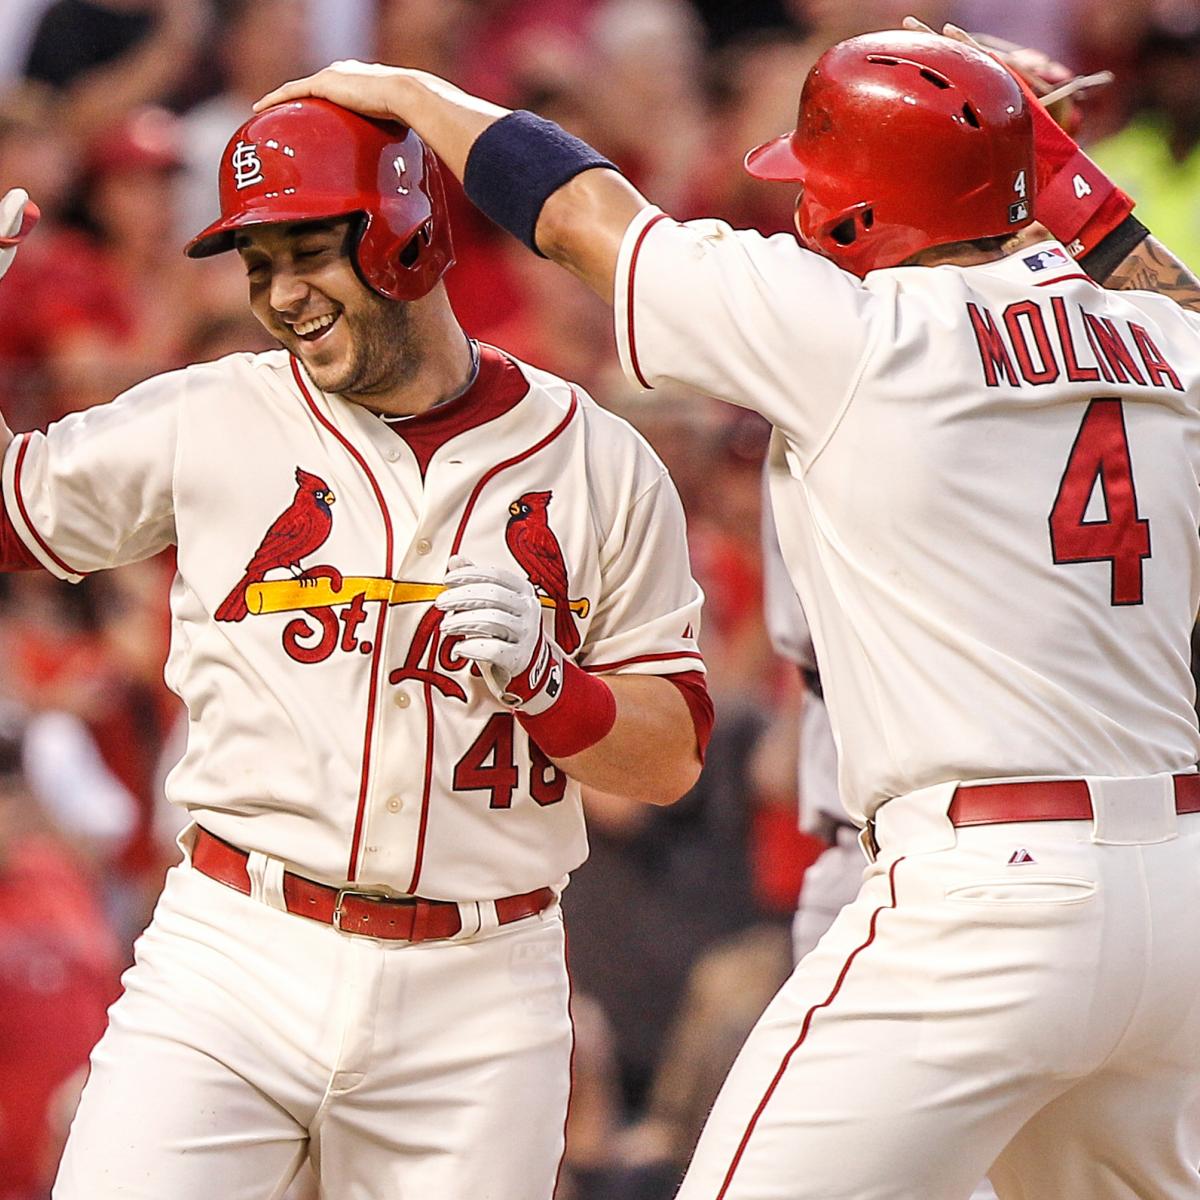 NLDS Schedule 2014: Dates and Predictions for Cardinals vs. Dodgers